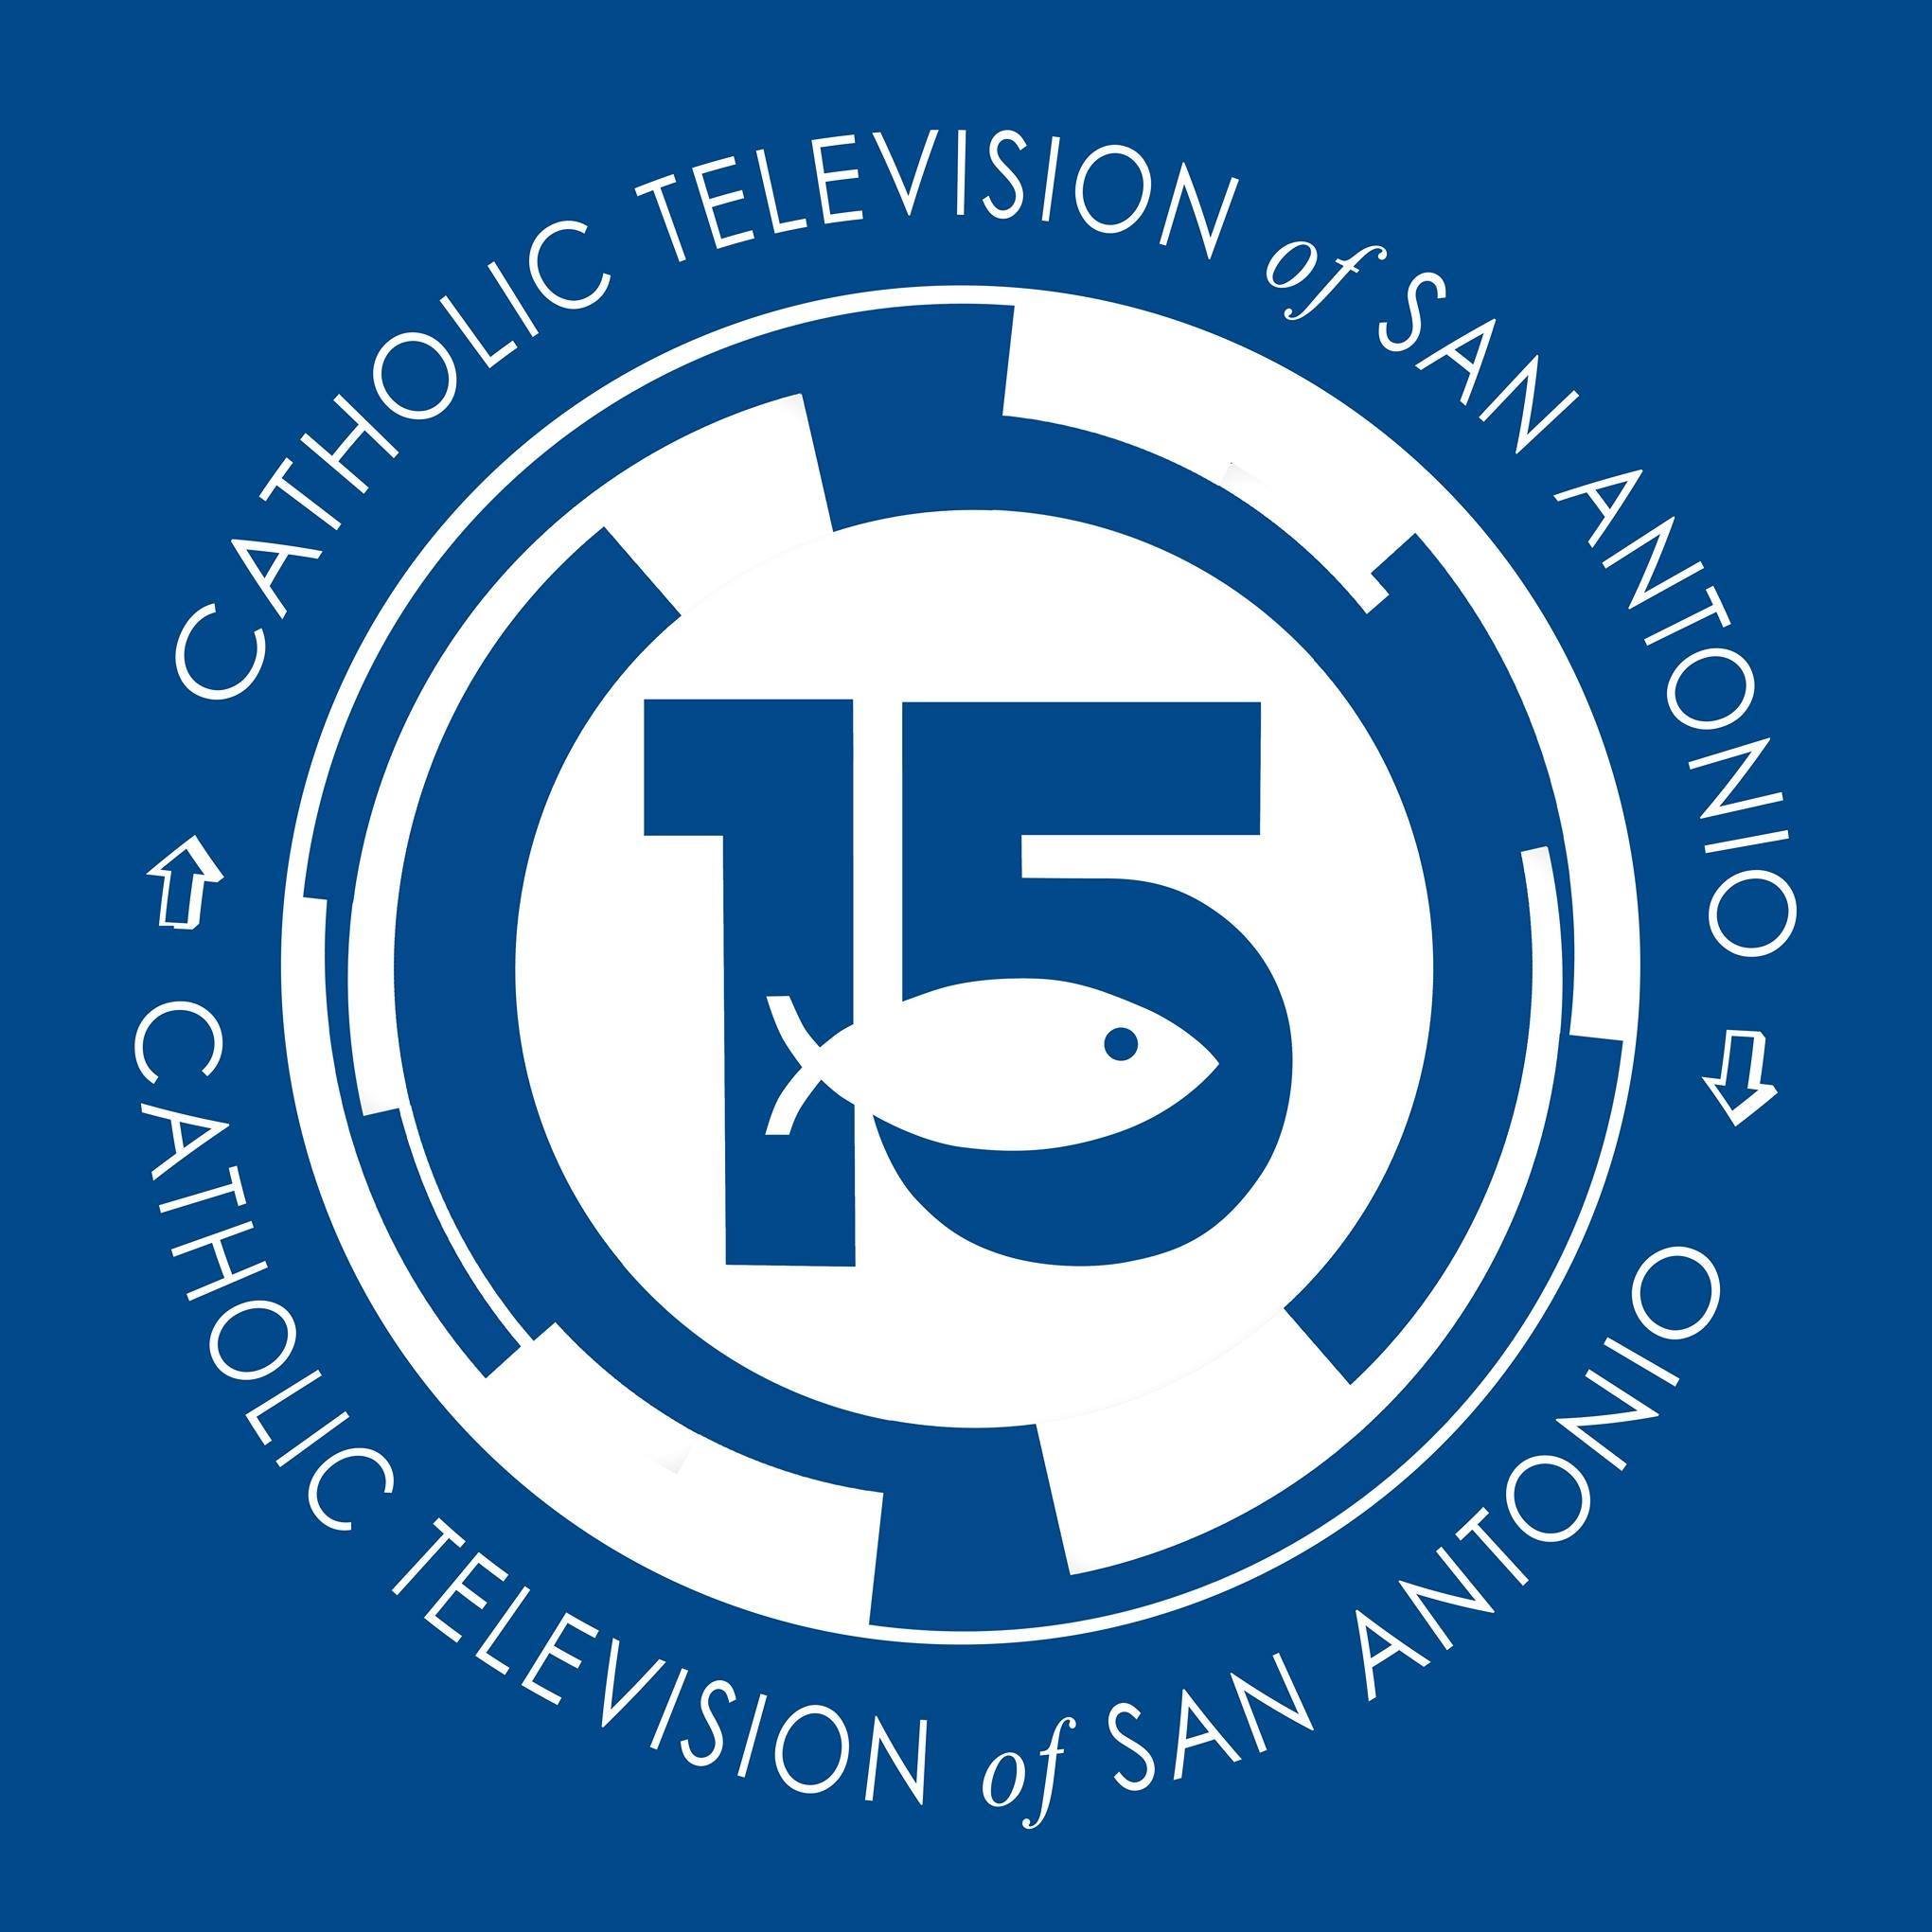 Shalom World joins with Catholic Television of San Antonio to bring more souls to Christ